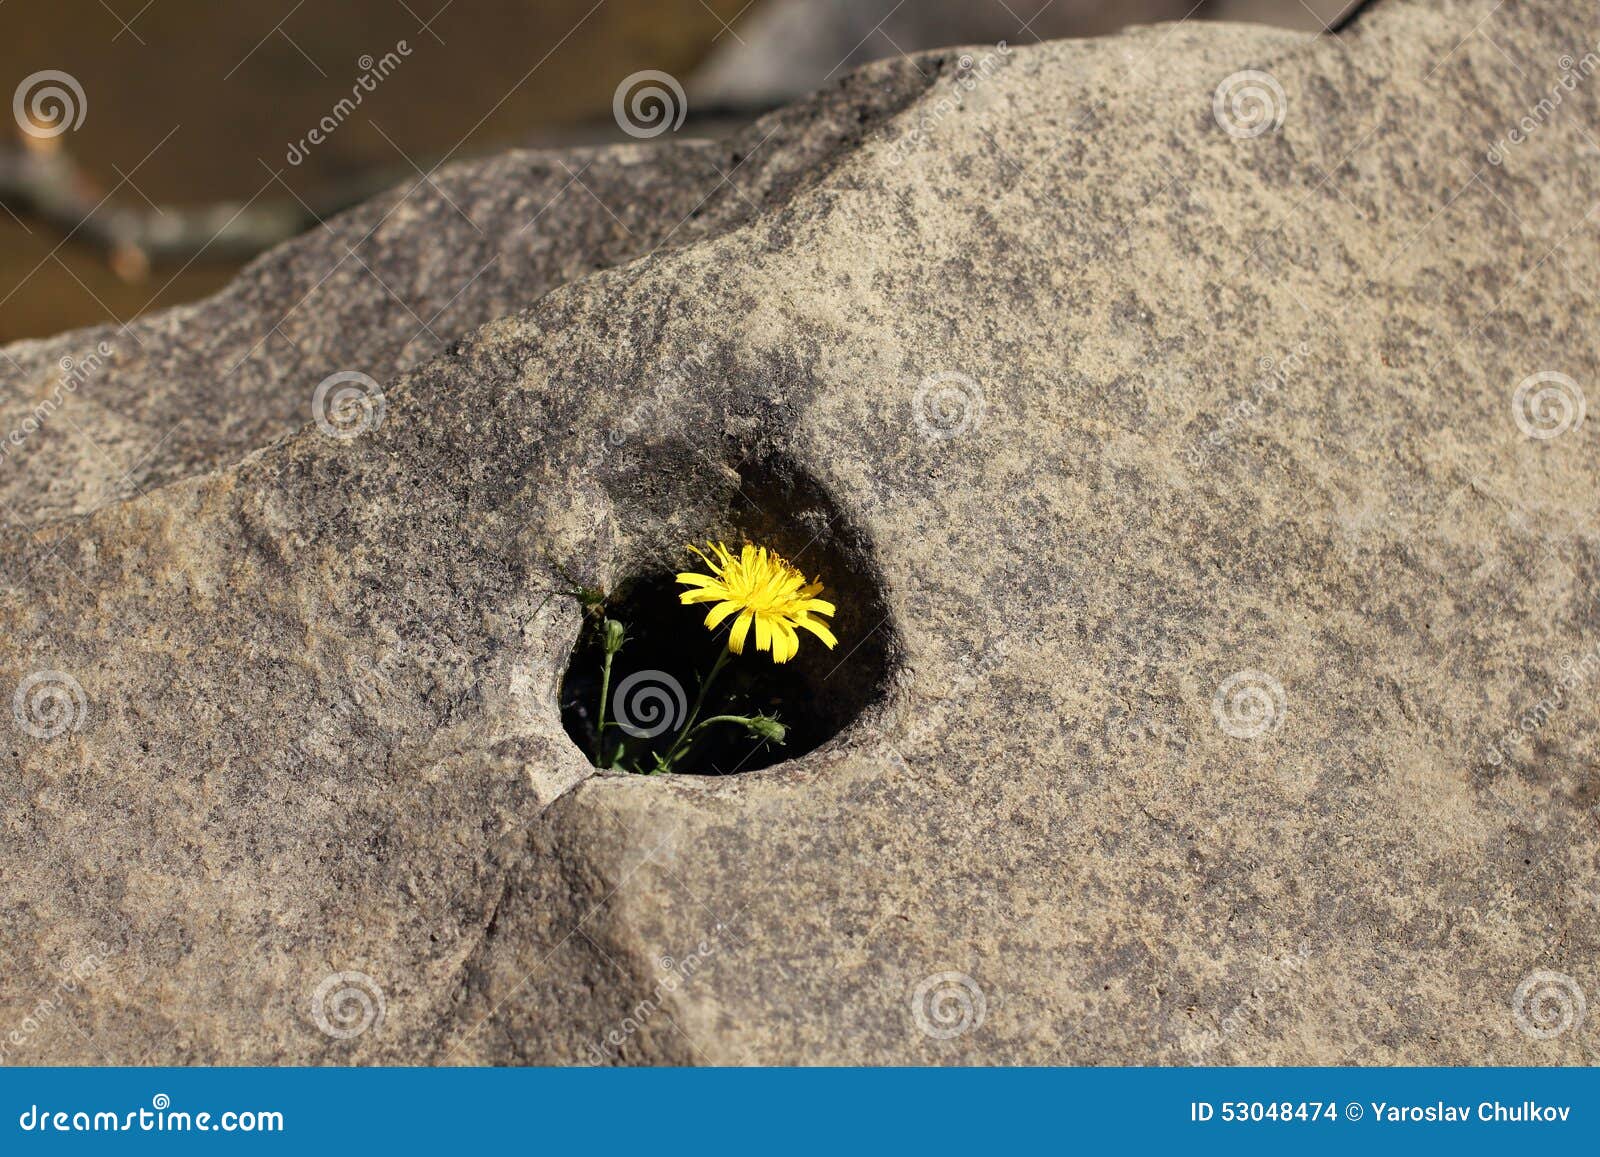 A flower in a stone. Tiny yellow flower growing up in a stone